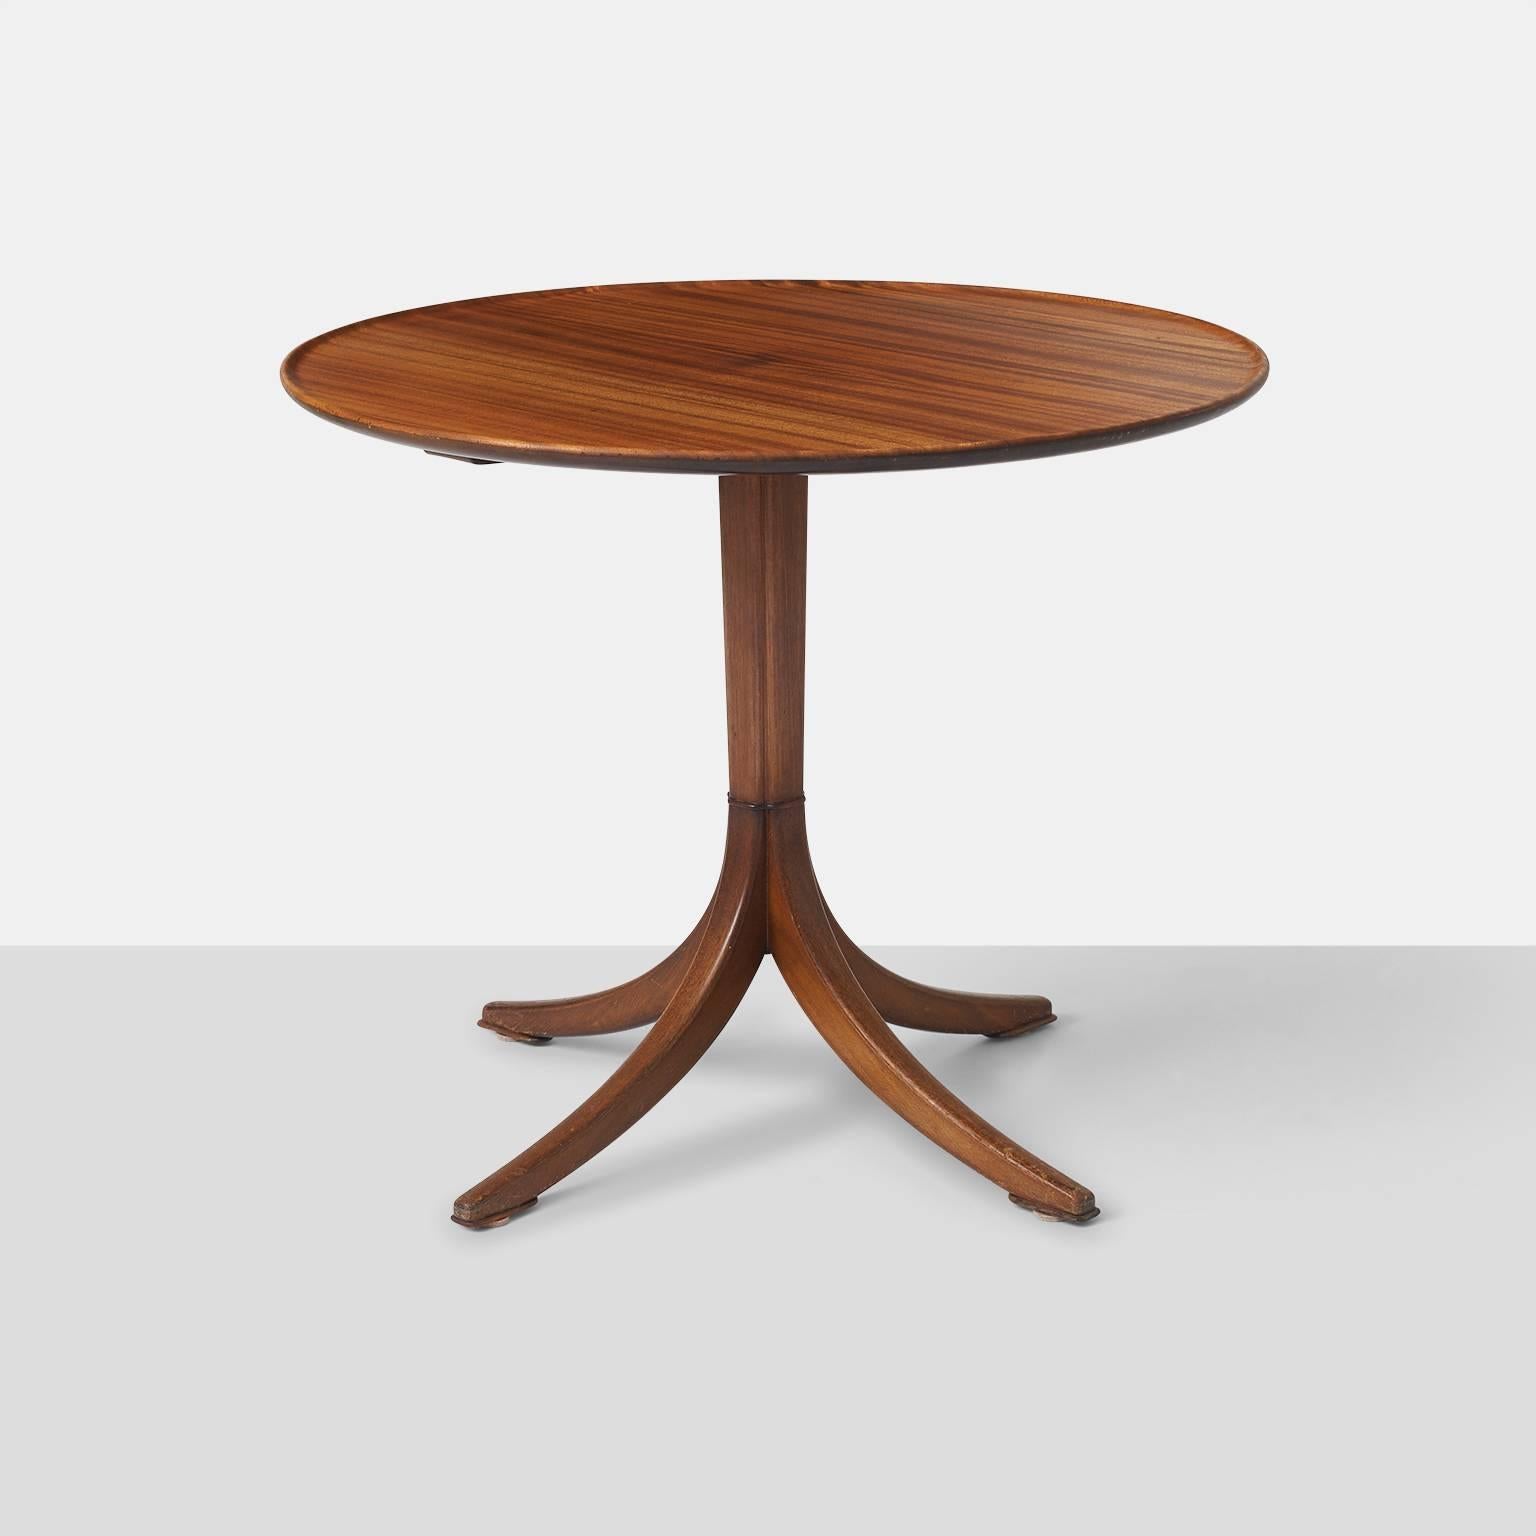 A circular side table in mahogany with a column stem and four star base. There is a matching table available that is slightly shorter and measures 22.5